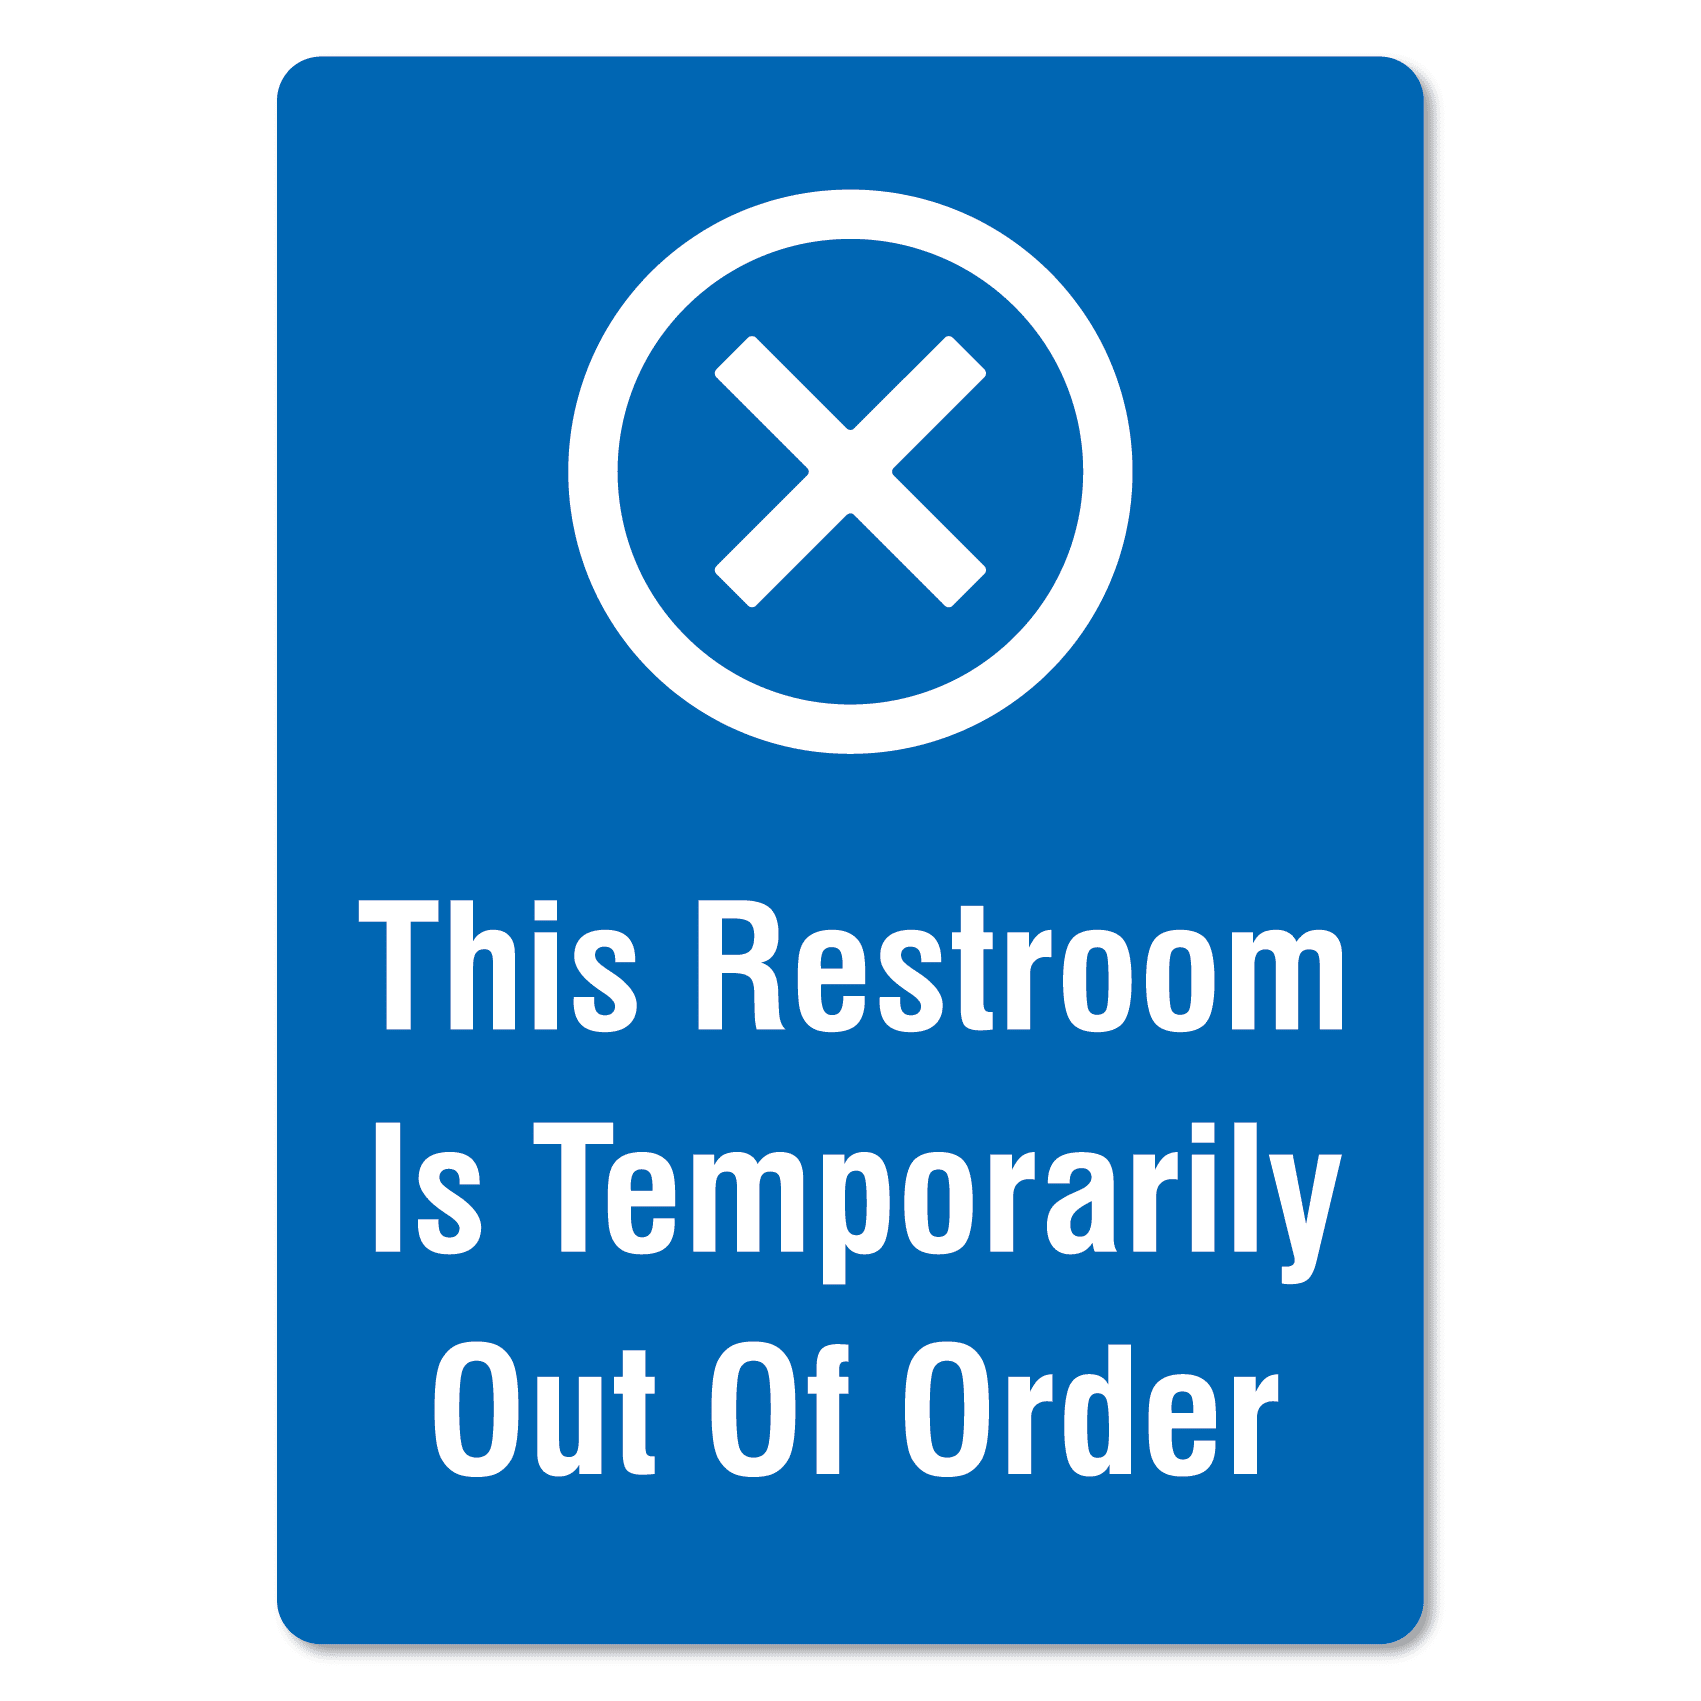 This Restroom Is Temporarily Out Of Order Sign - The Signmaker